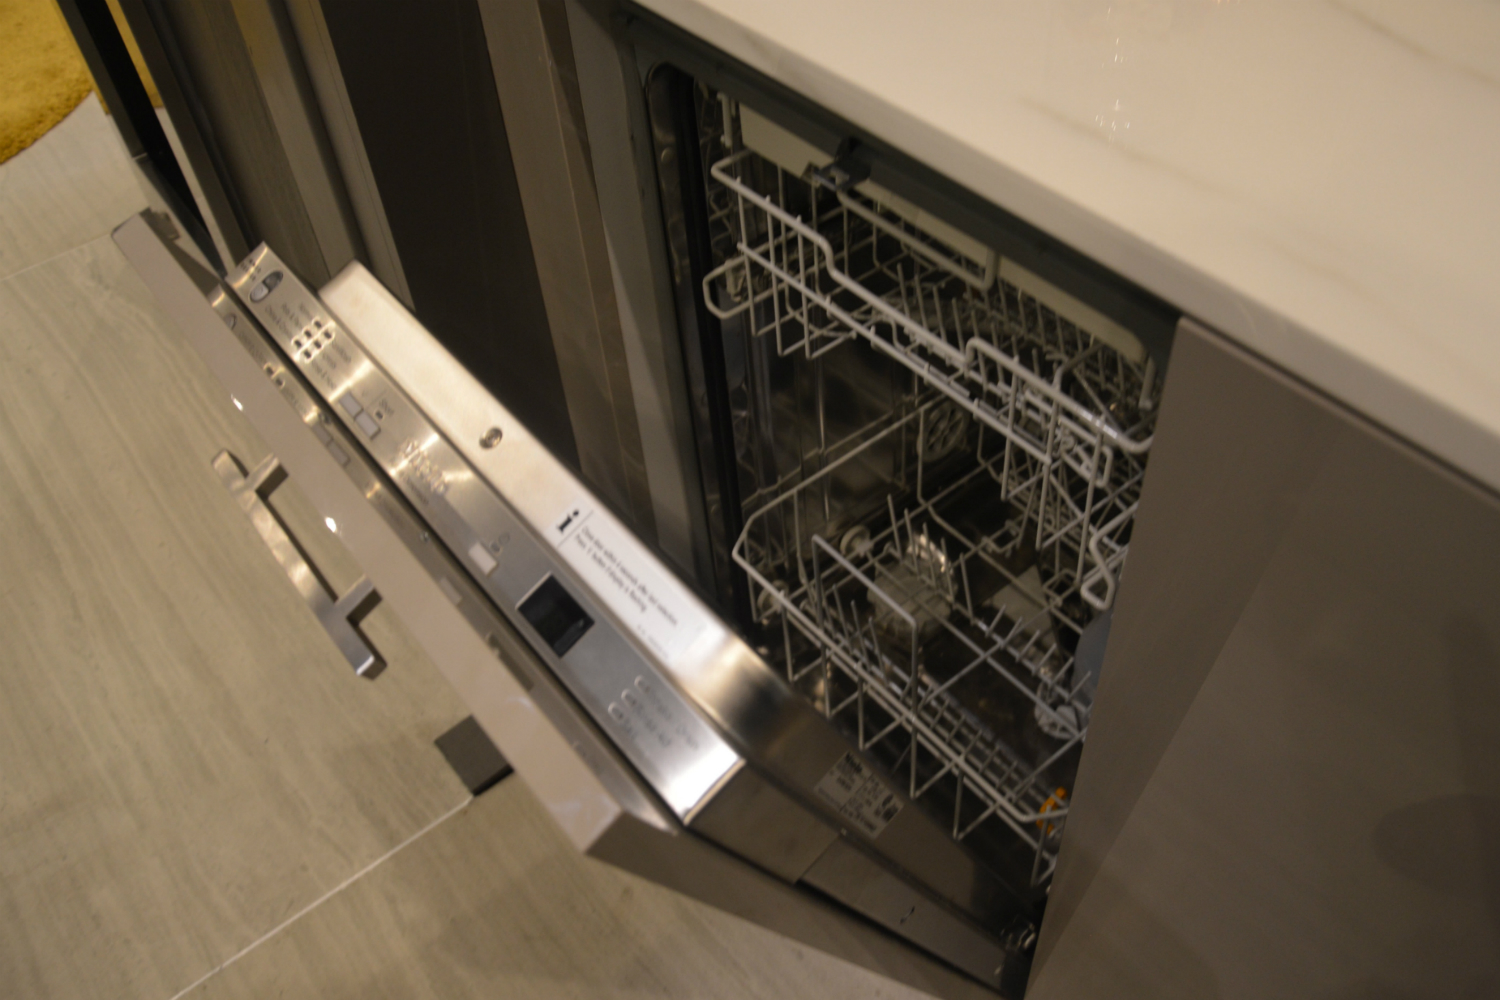 appliance trends kbis 2017 miele 18 inch dishwasher